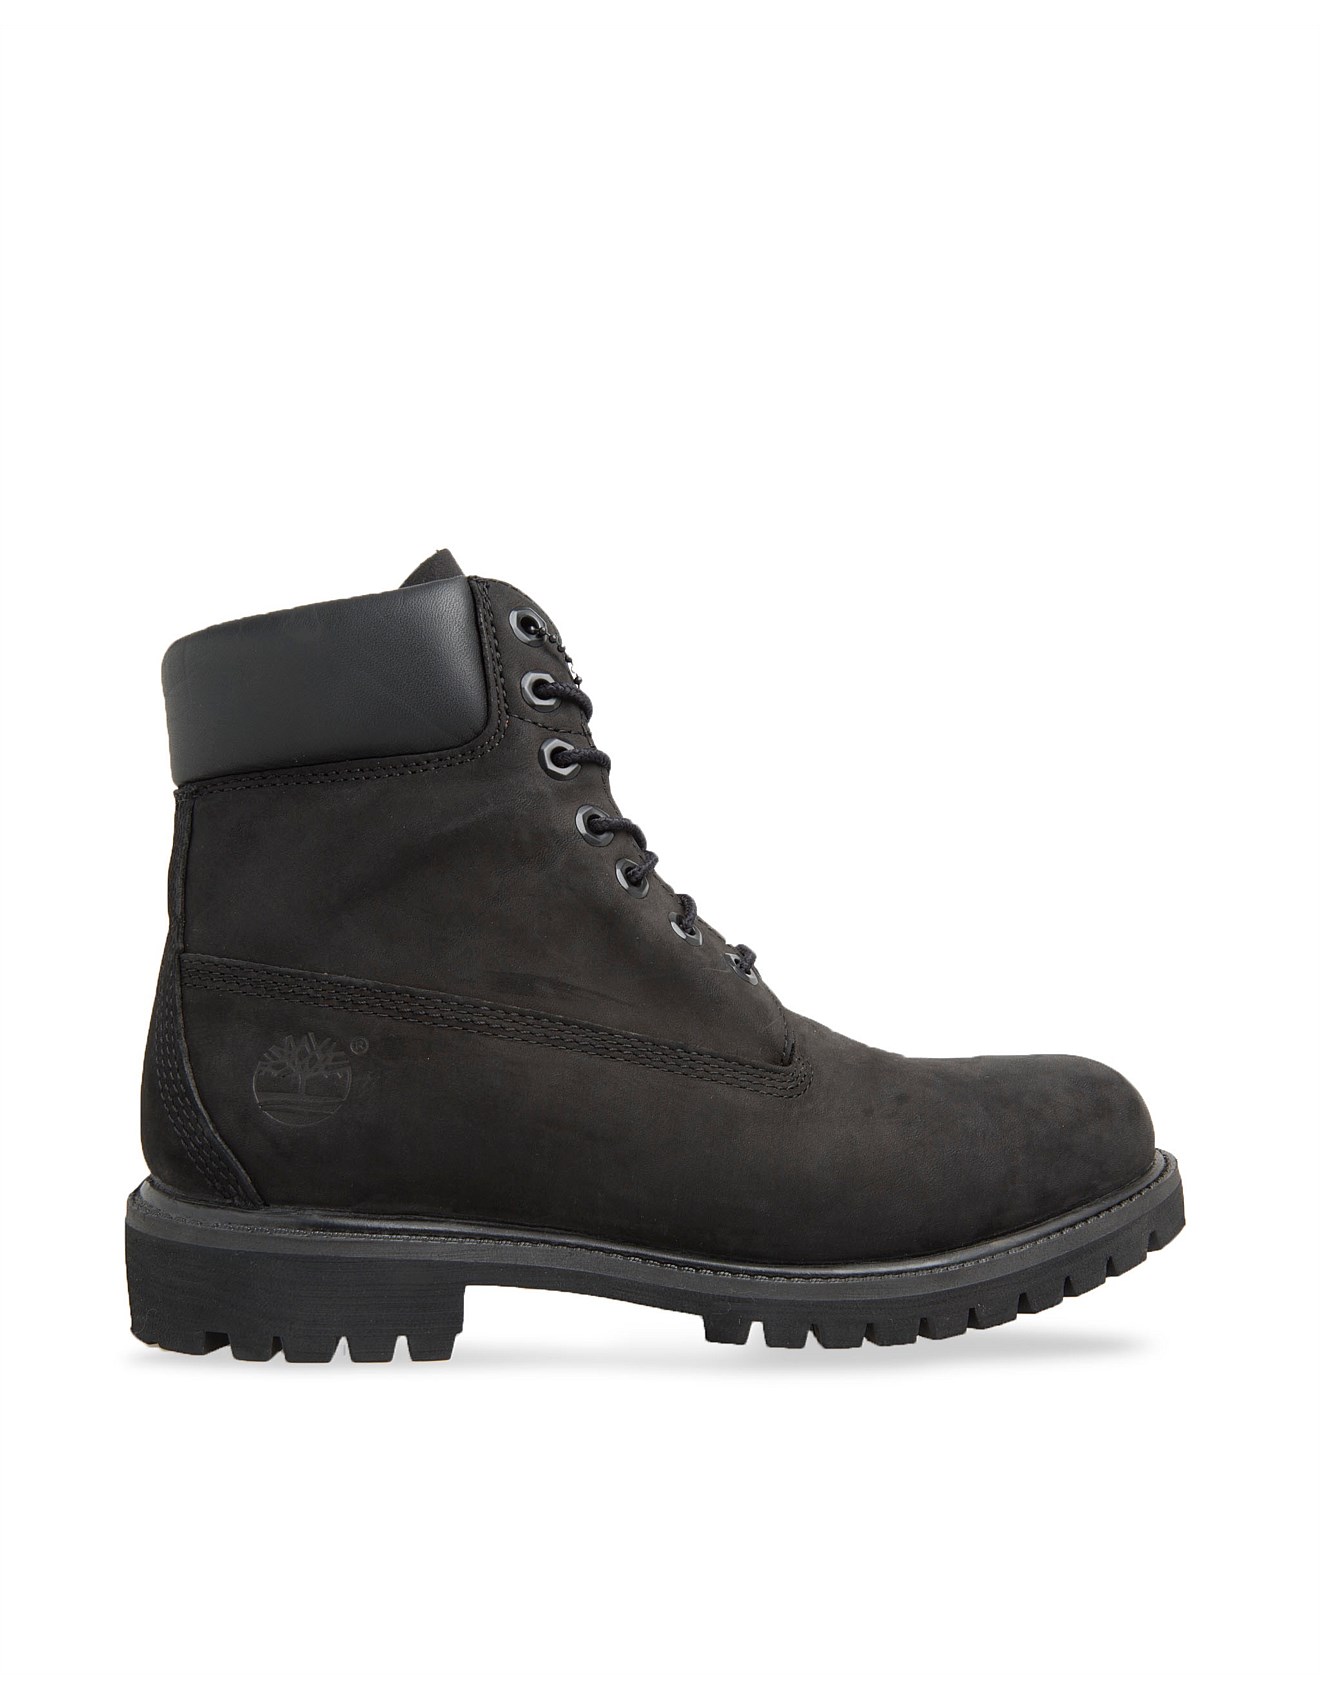 Icon Boots at Vectorified.com | Collection of Icon Boots free for ...